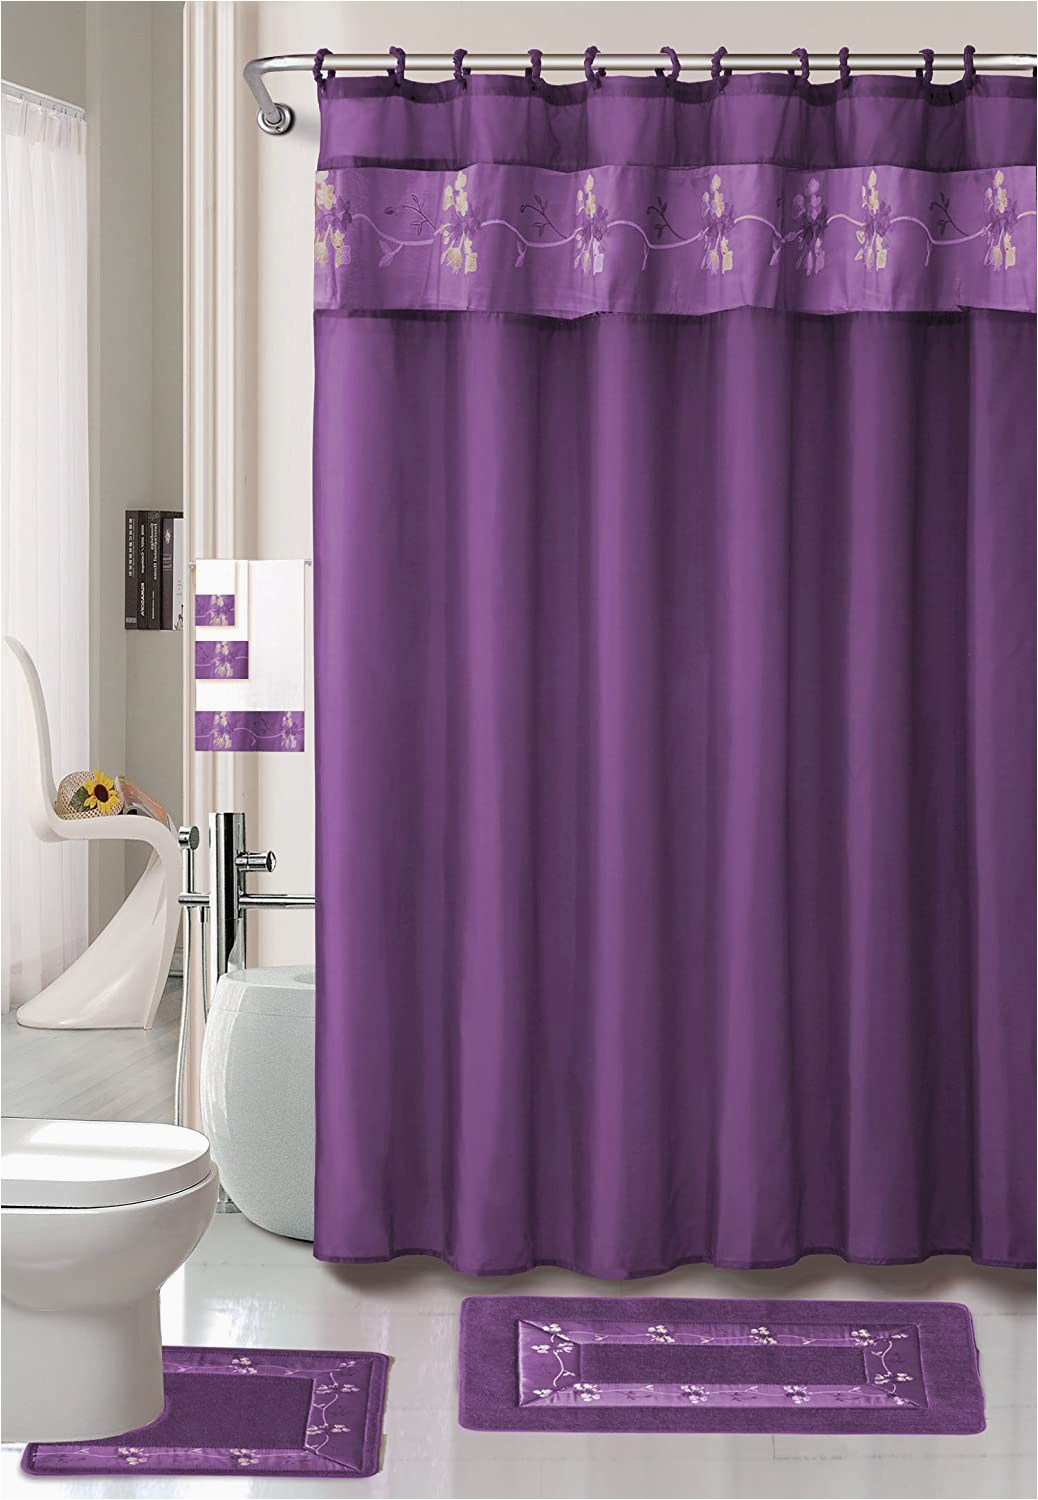 Purple Bath towels and Rugs Ahf Wpm Beverly Purple Flower 18 Piece Bathroom Set 2 Rugs Mats 1 Fabric Shower Curtain 12 Fabric Covered Rings 3 Pc Decorative towel Set